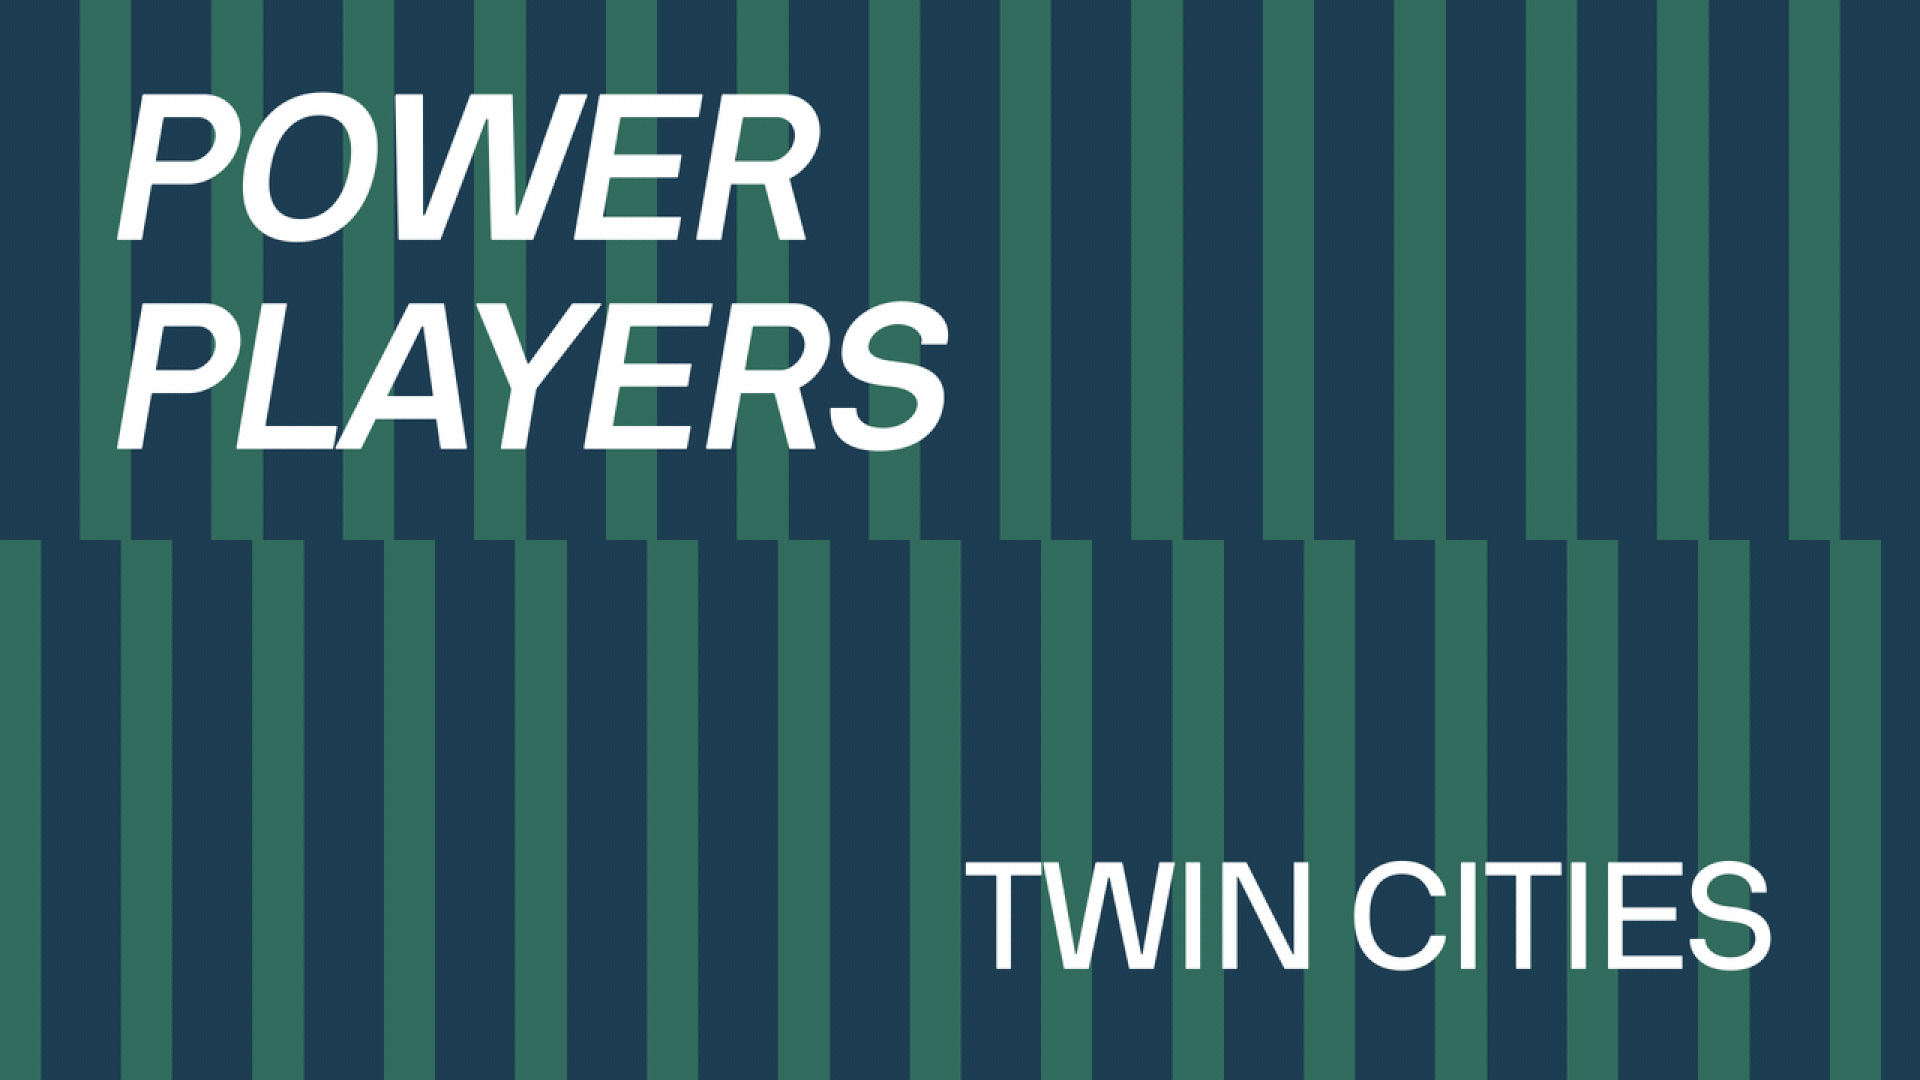 Illustration of two rows of dominos falling with text overlaid that reads Power Players Twin Cities.